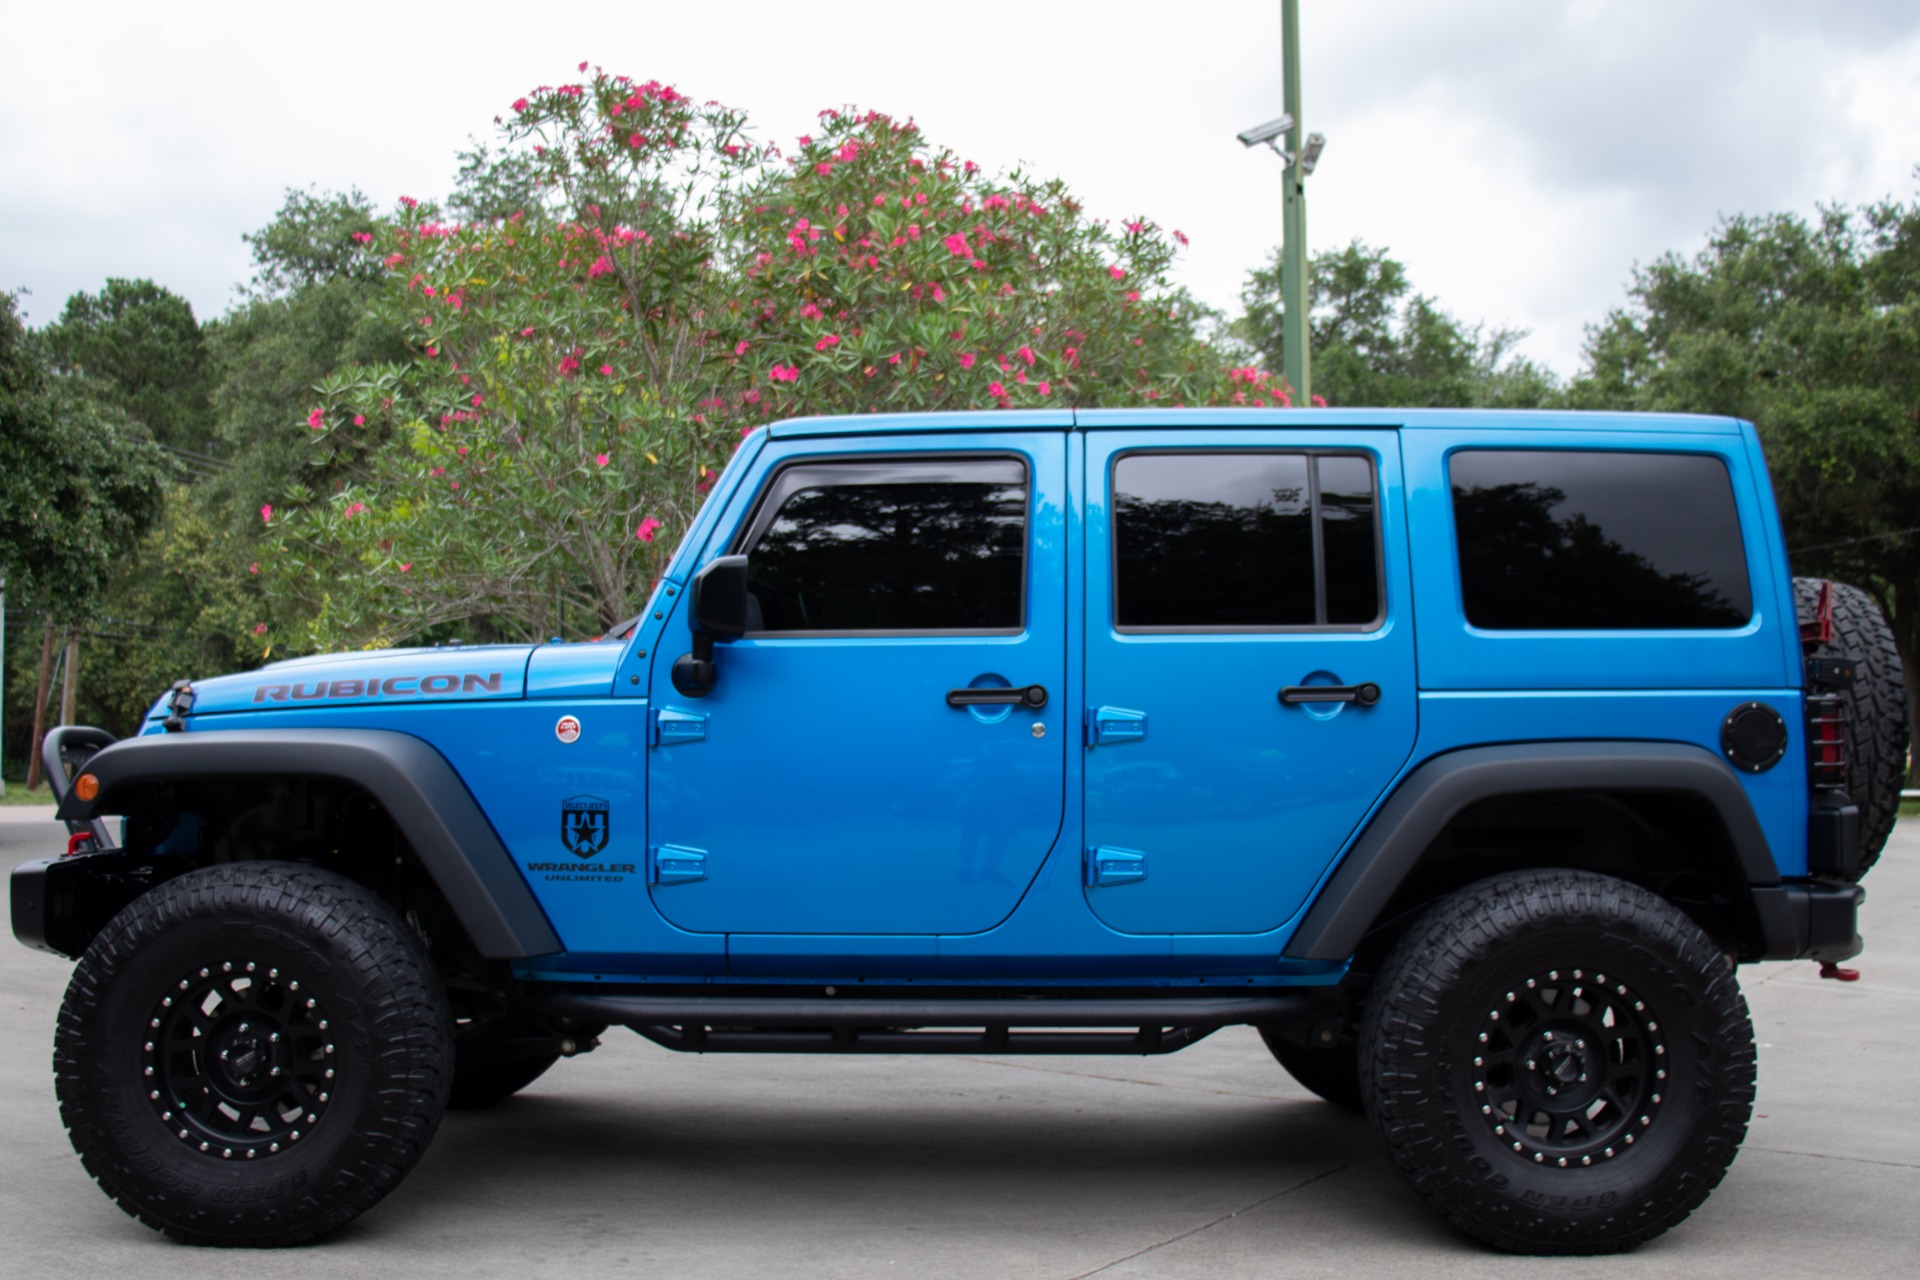 Used 16 Jeep Wrangler Unlimited Rubicon Hard Rock For Sale 37 995 Select Jeeps Inc Stock